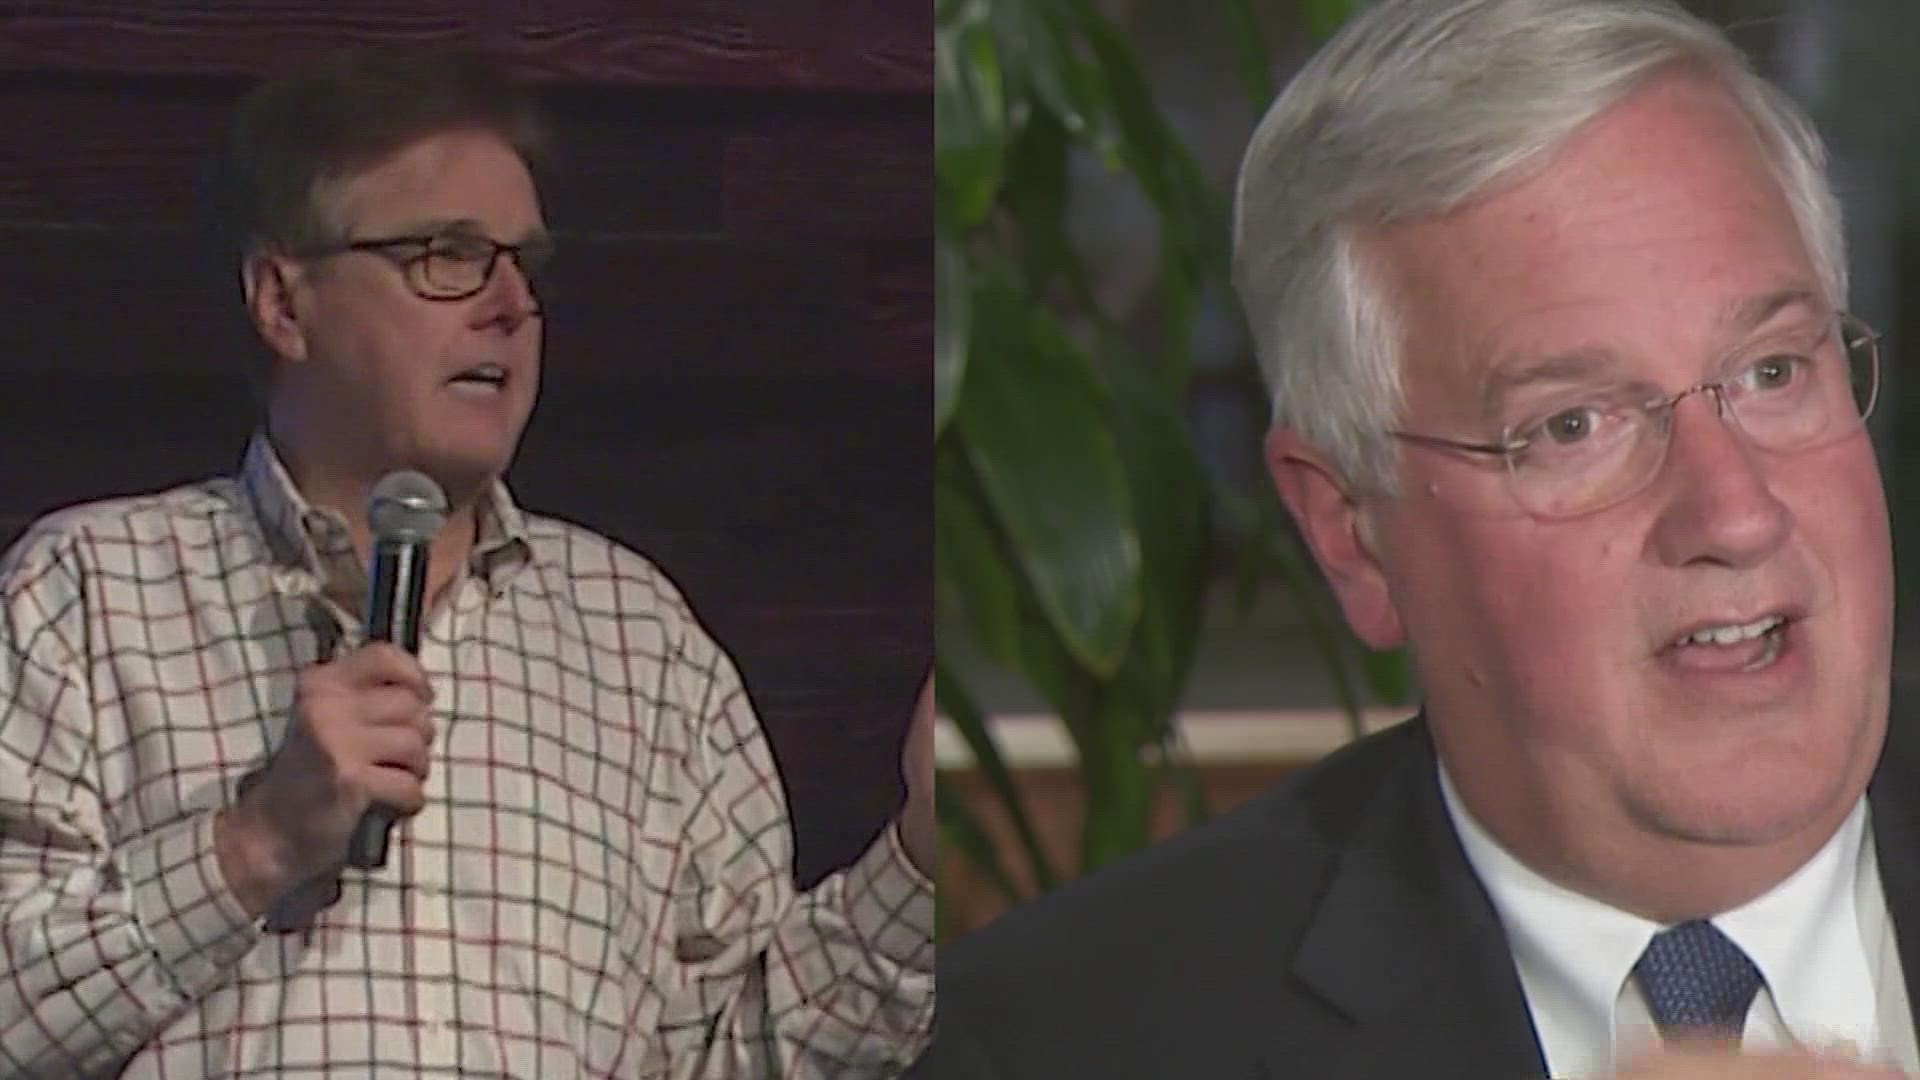 In 2018, Republican incumbent Dan Patrick defeated Democrat Mike Collier by 5 points. A new poll shows Patrick up by the same amount ahead of this year's election.